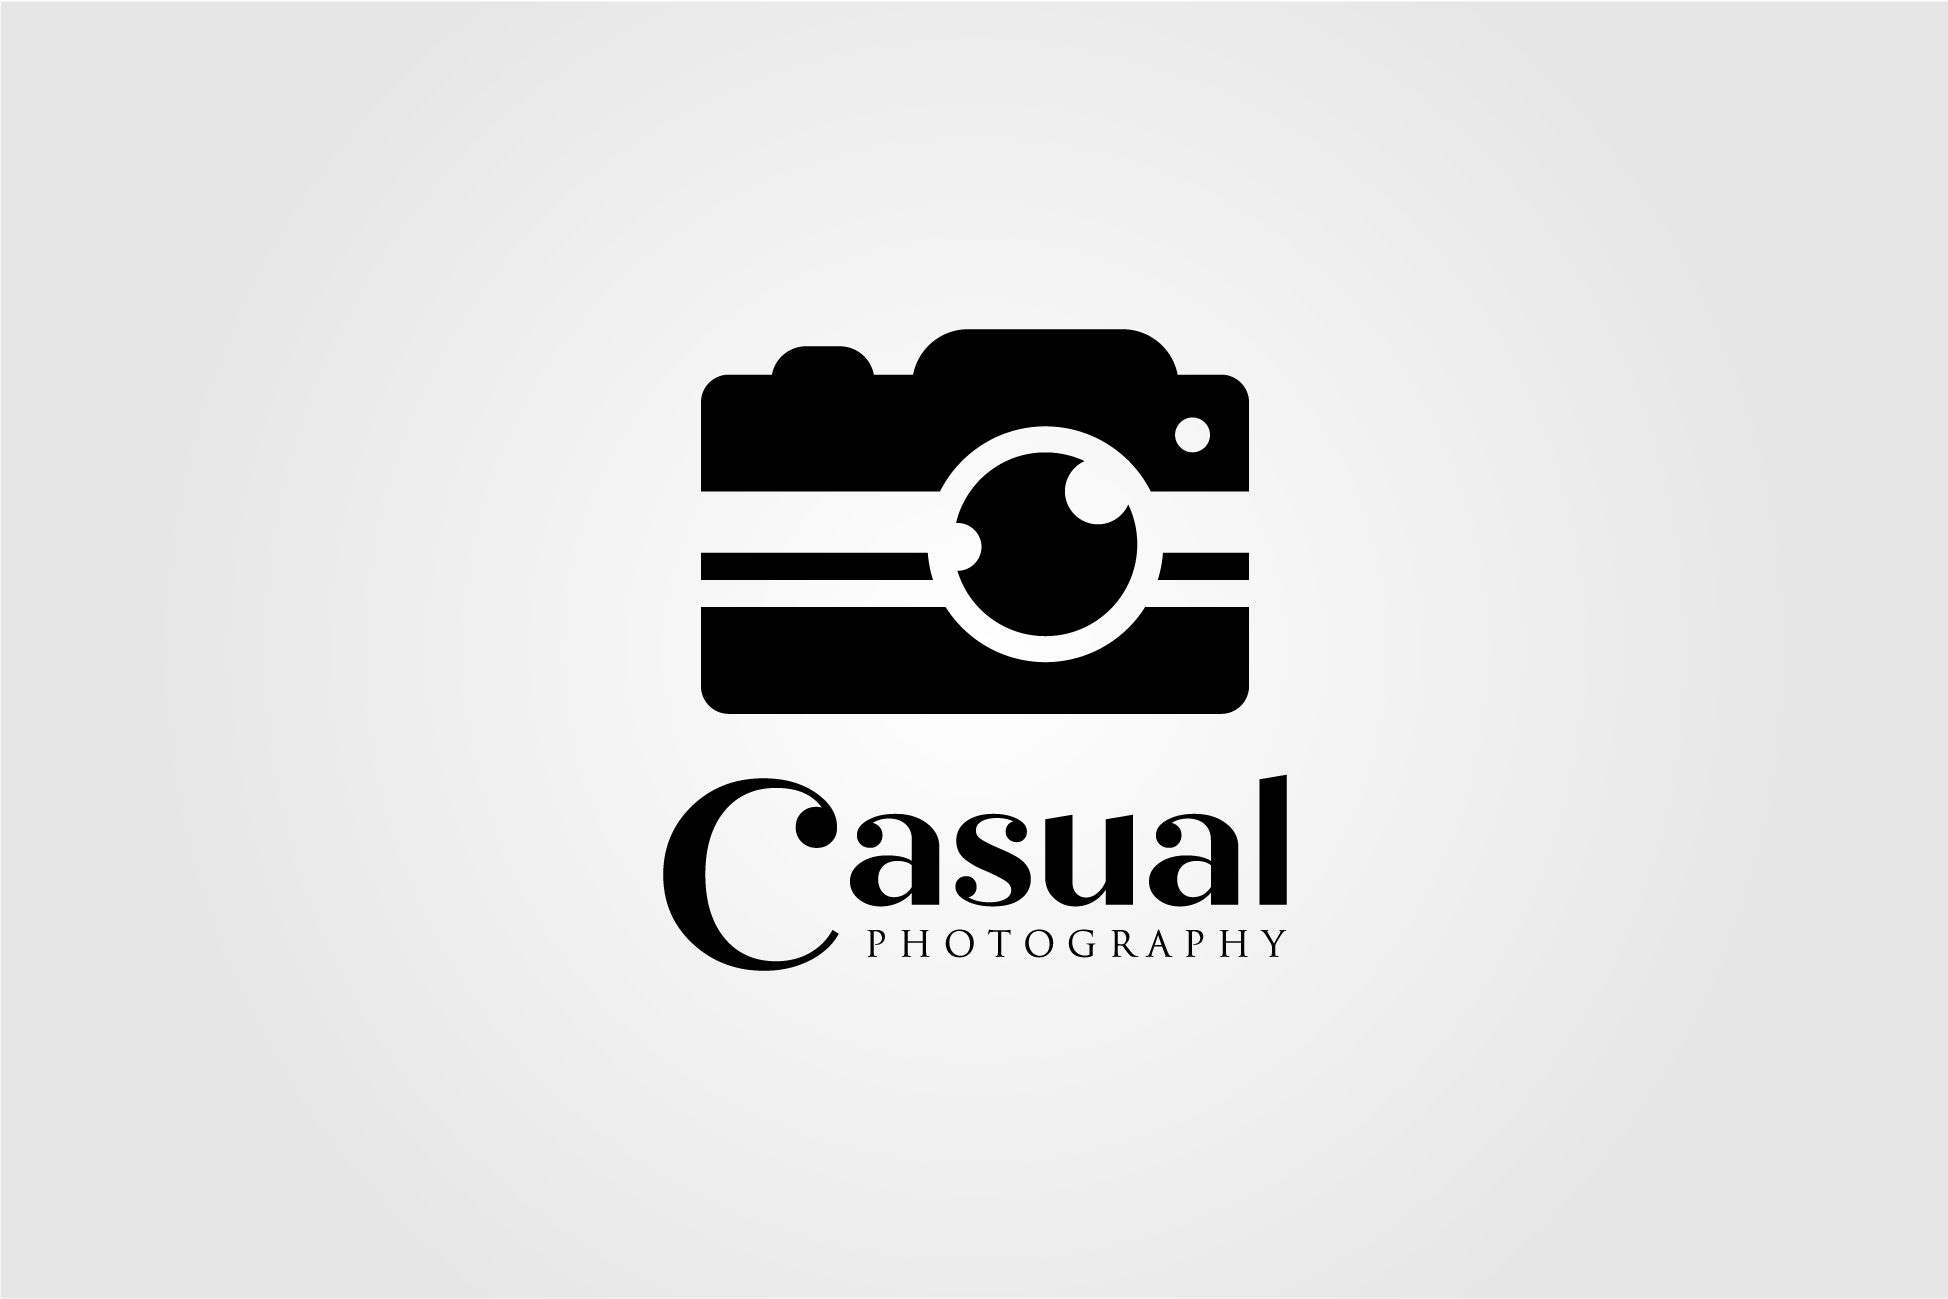 Casual Camera Photography Logo Design Graphic by lawoel · Creative Fabrica